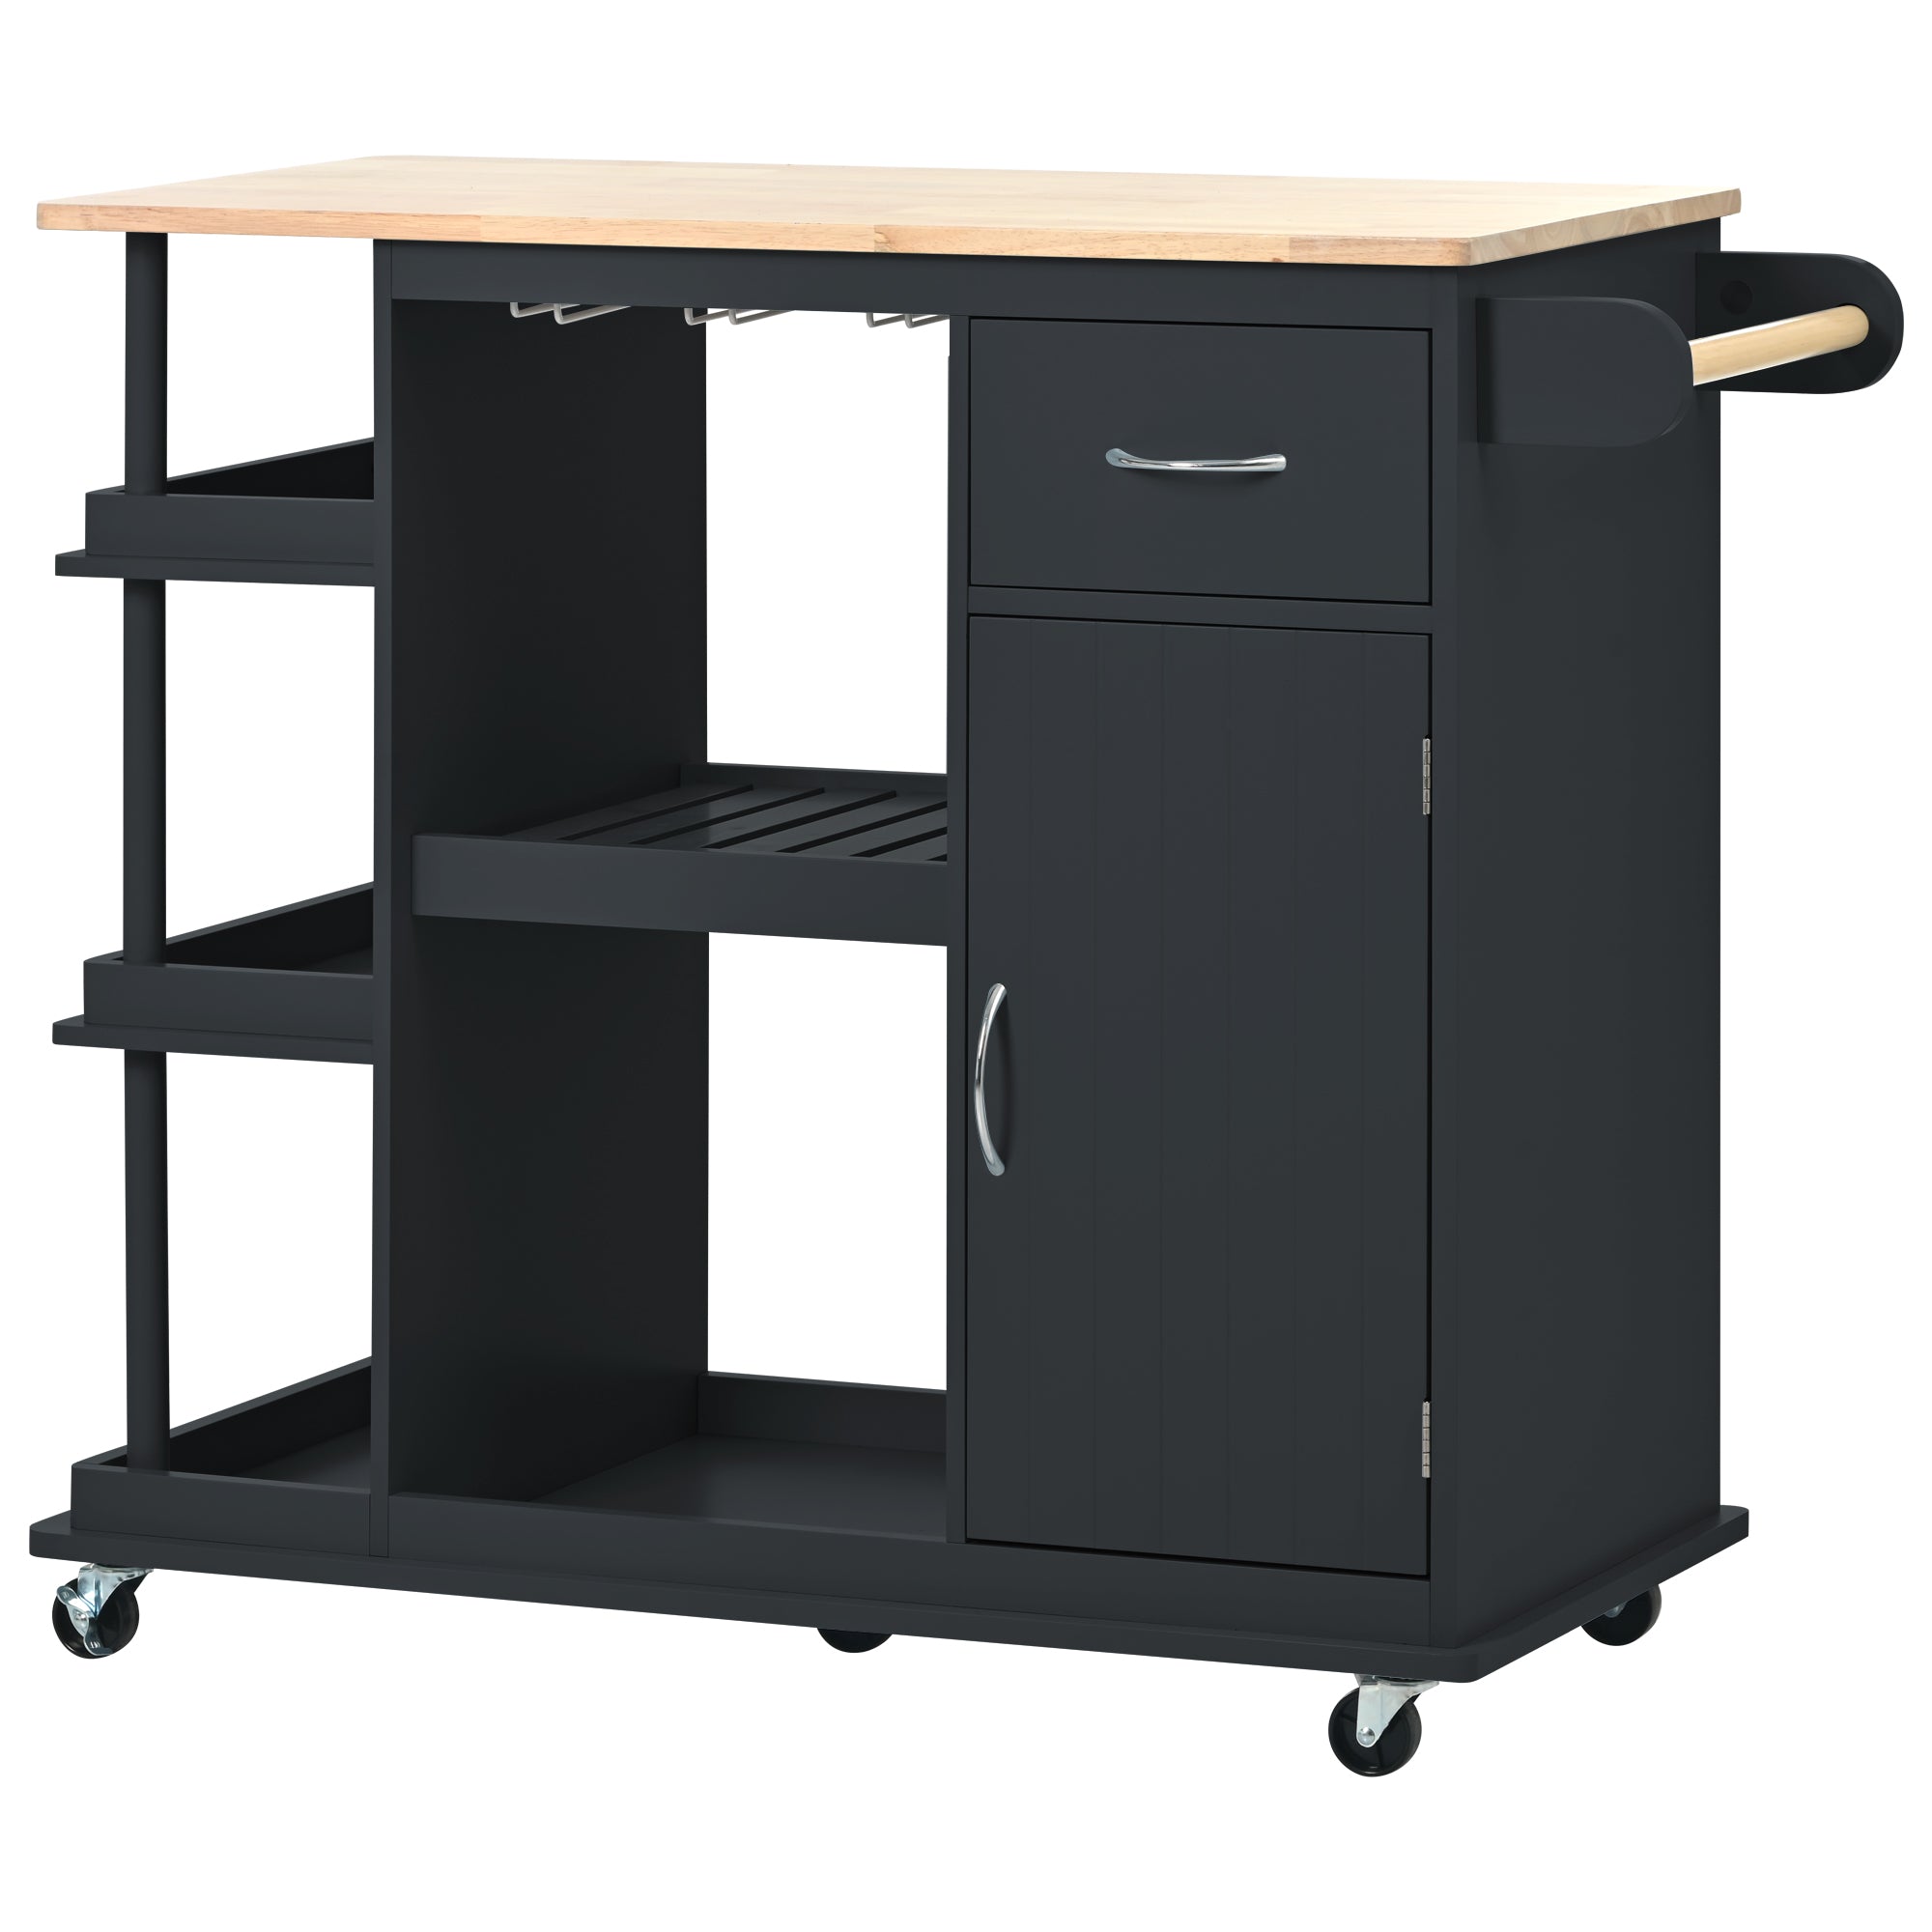 RaDEWAY Kitchen Cart Cabinet with Adjustable Storage Shelves Rubber Wood Top with 5 Wheels